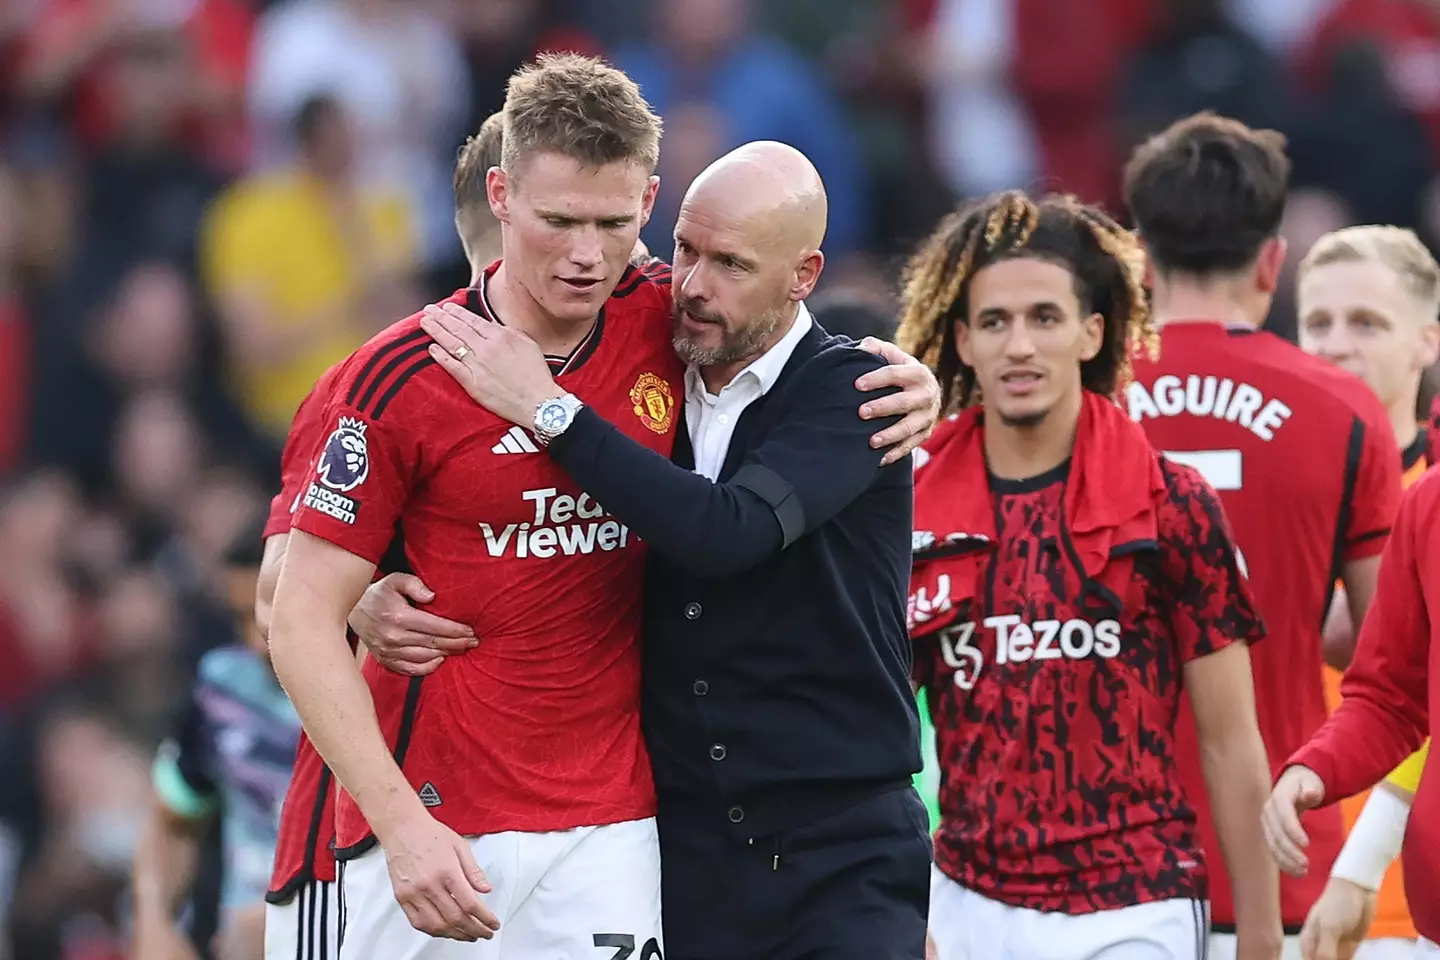 Scott McTominay has been one of few bright sparks for United. (Image: Getty)